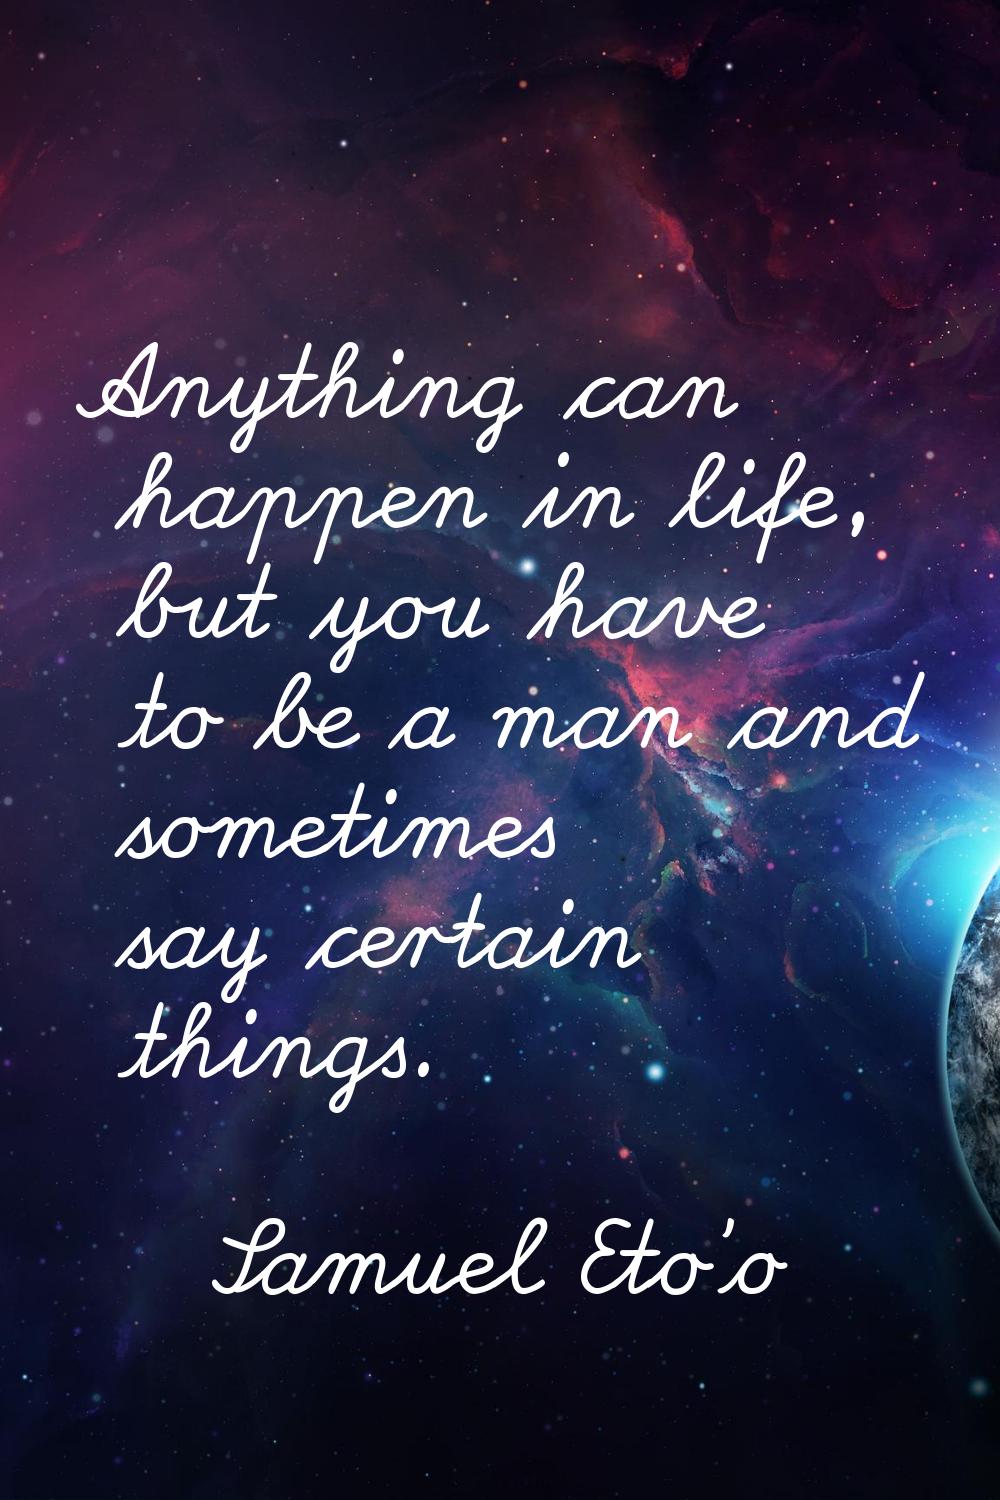 Anything can happen in life, but you have to be a man and sometimes say certain things.